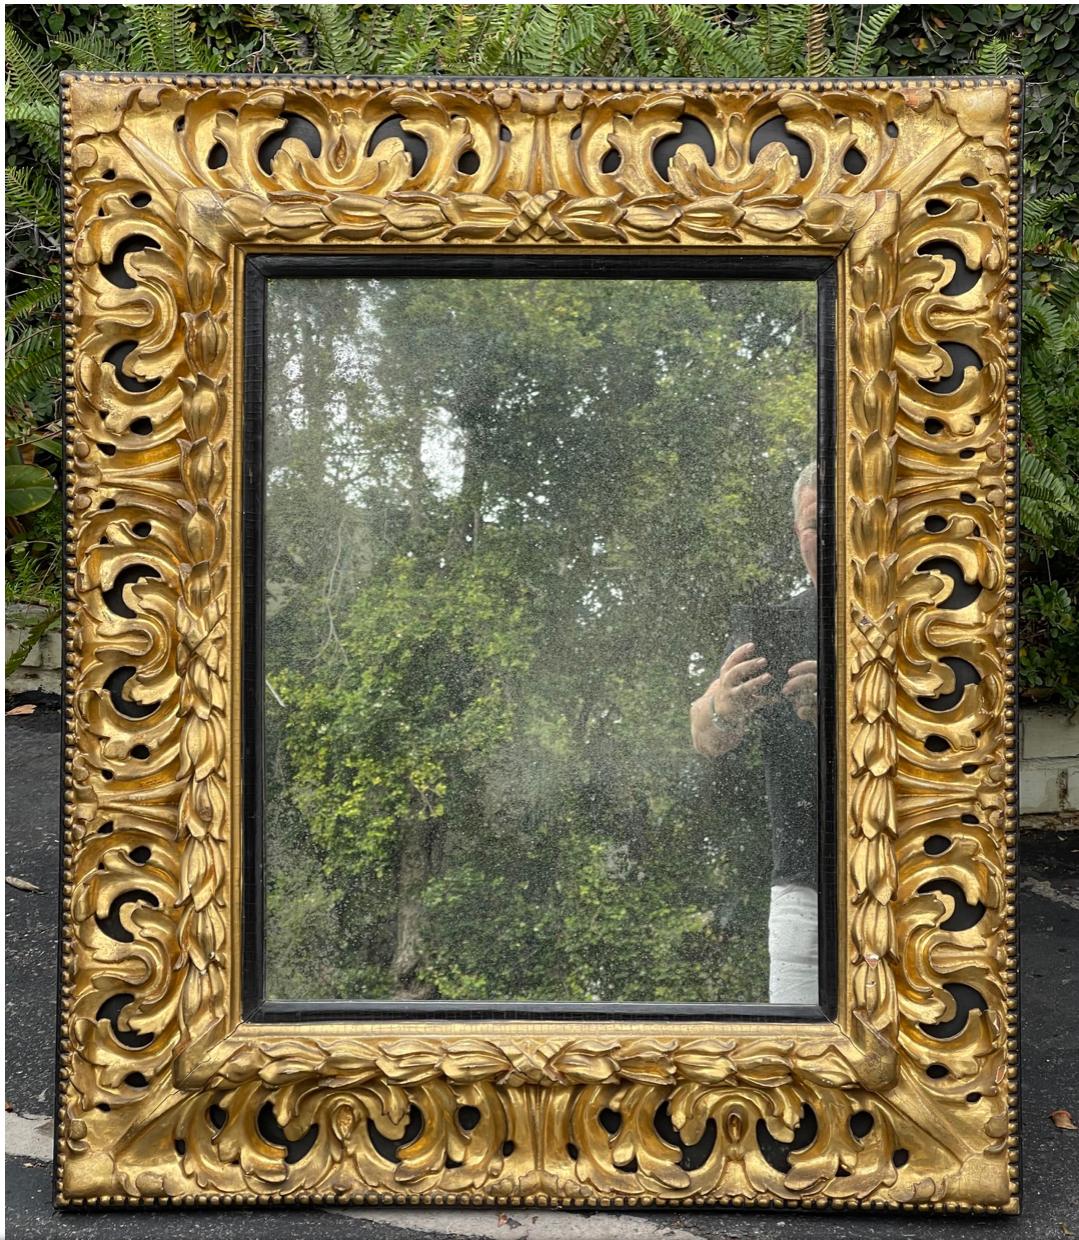 Antique Early 19th Century Louis XVI Empire Giltwood Ebony mirror. It features carved giltwood over ebonized wood and has custom made antiqued mirror glass.